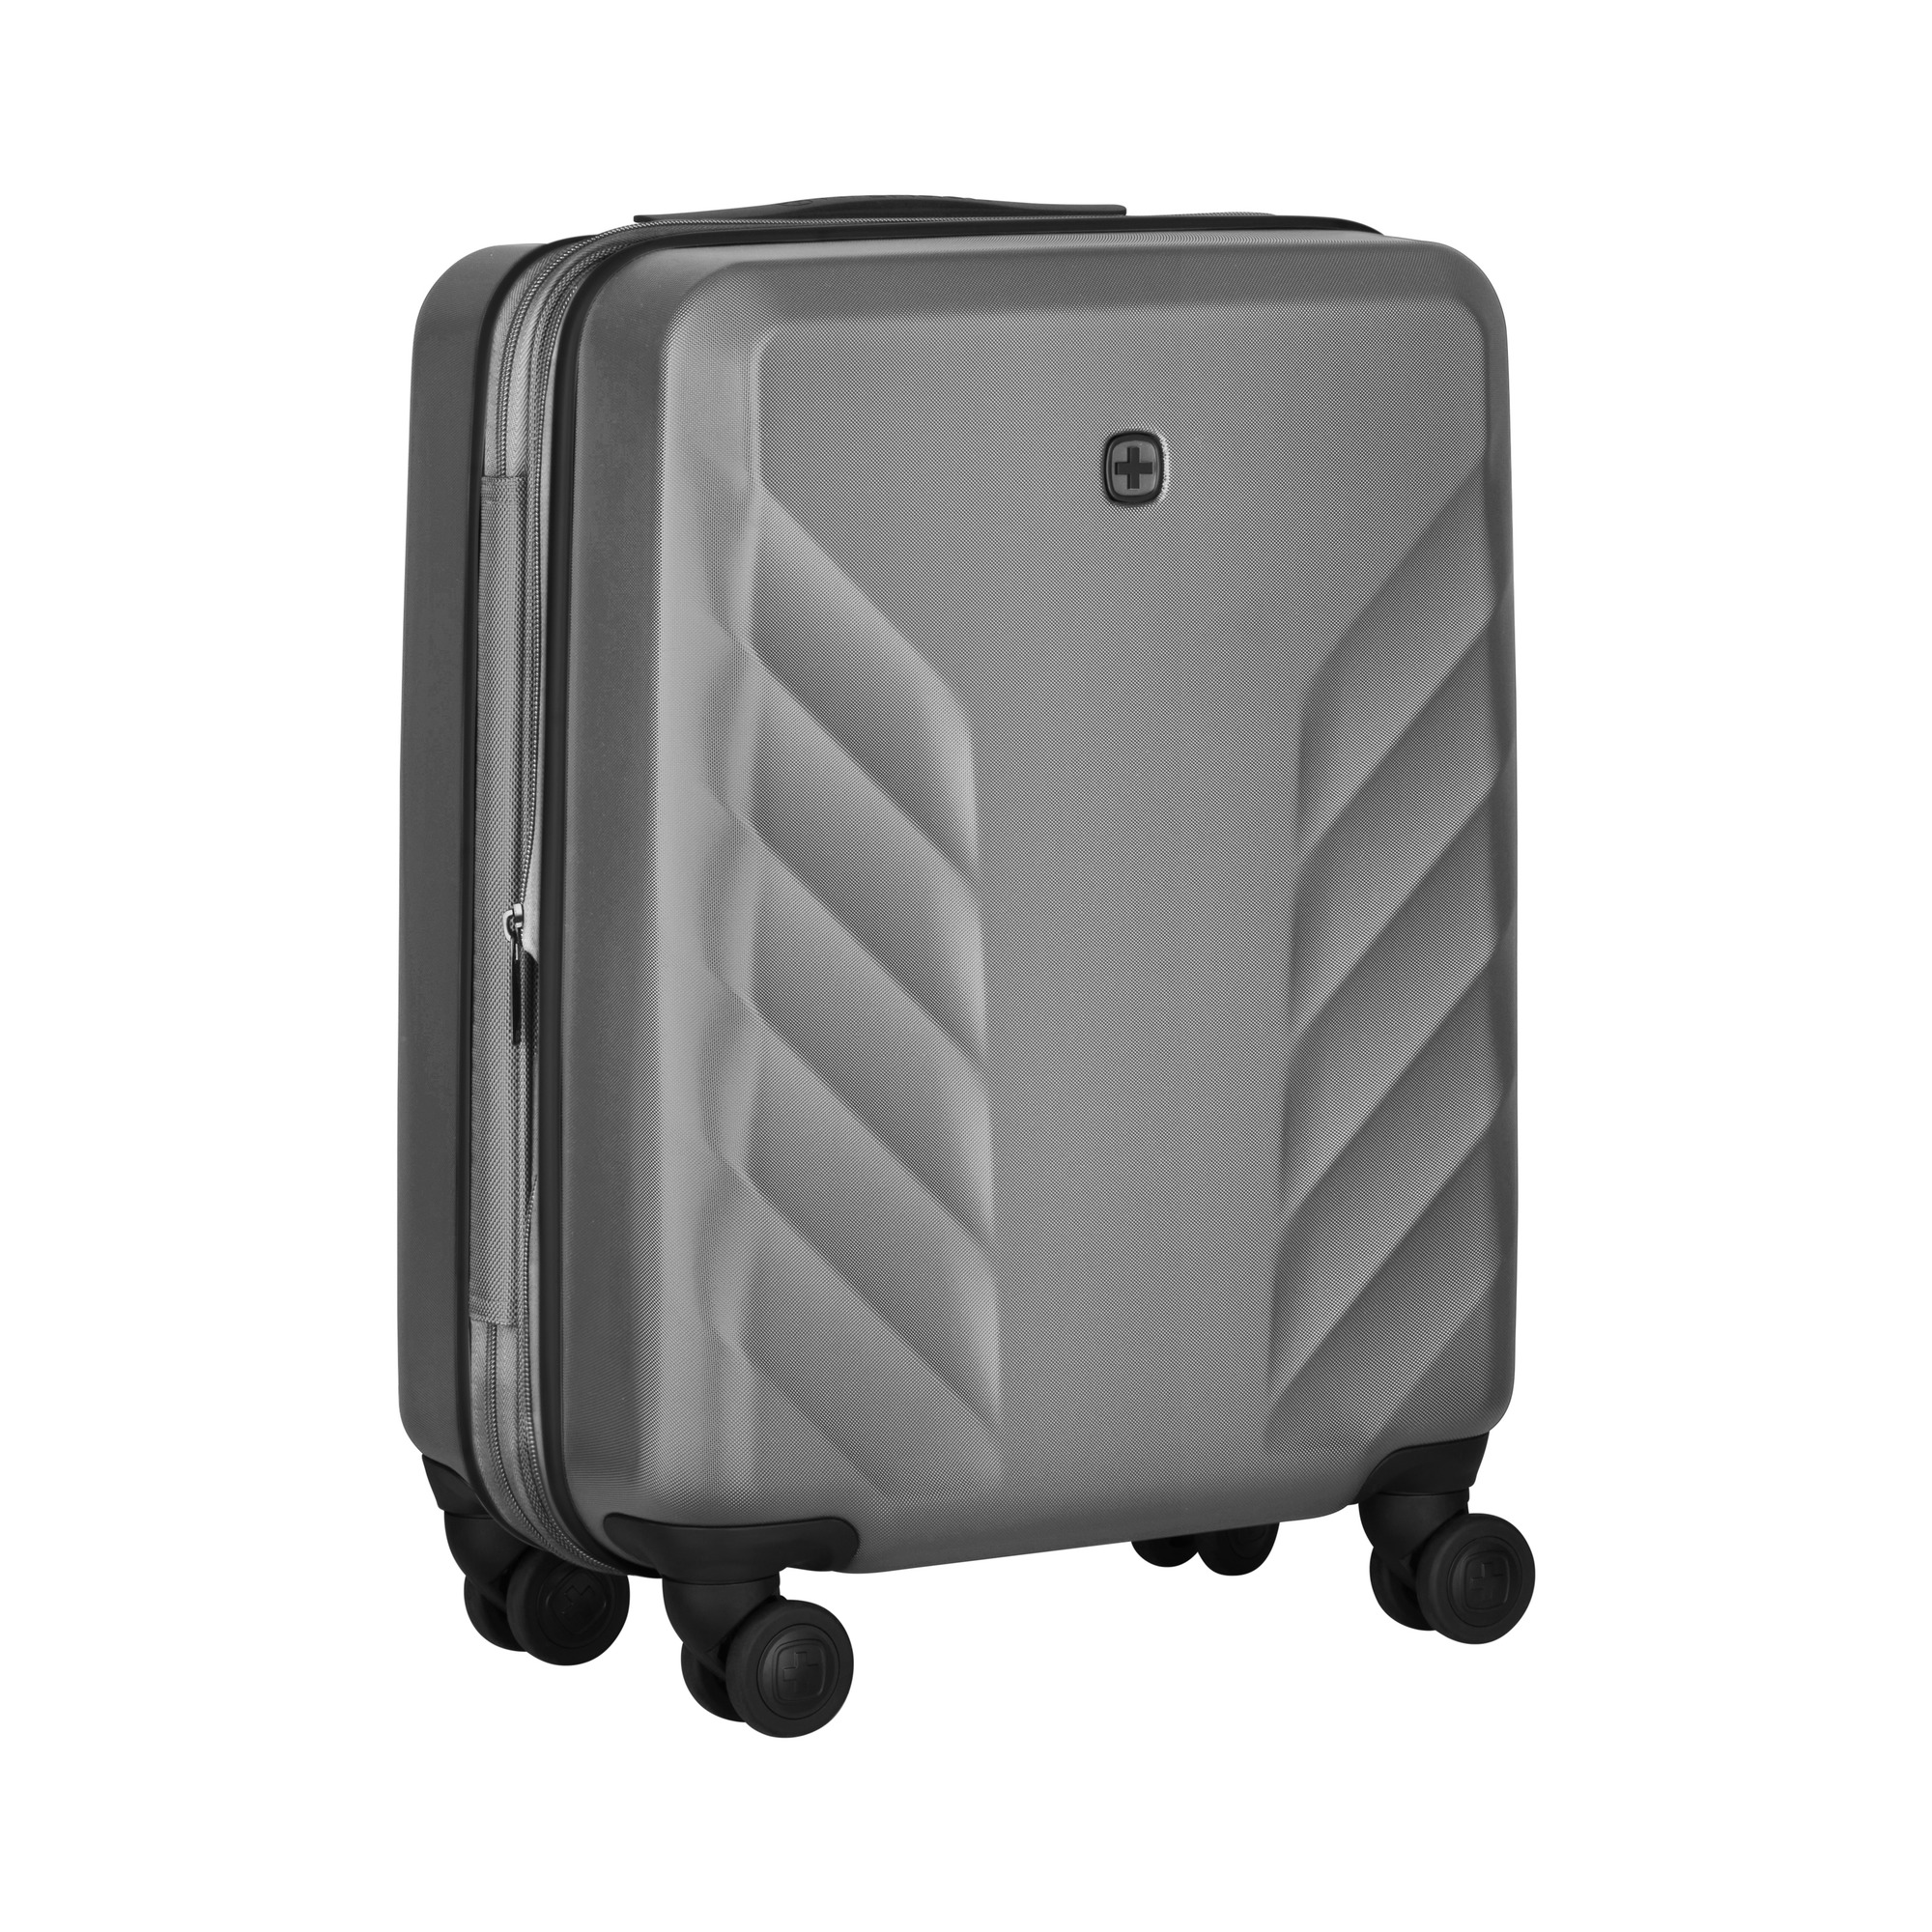 Wenger Motion Carry-On